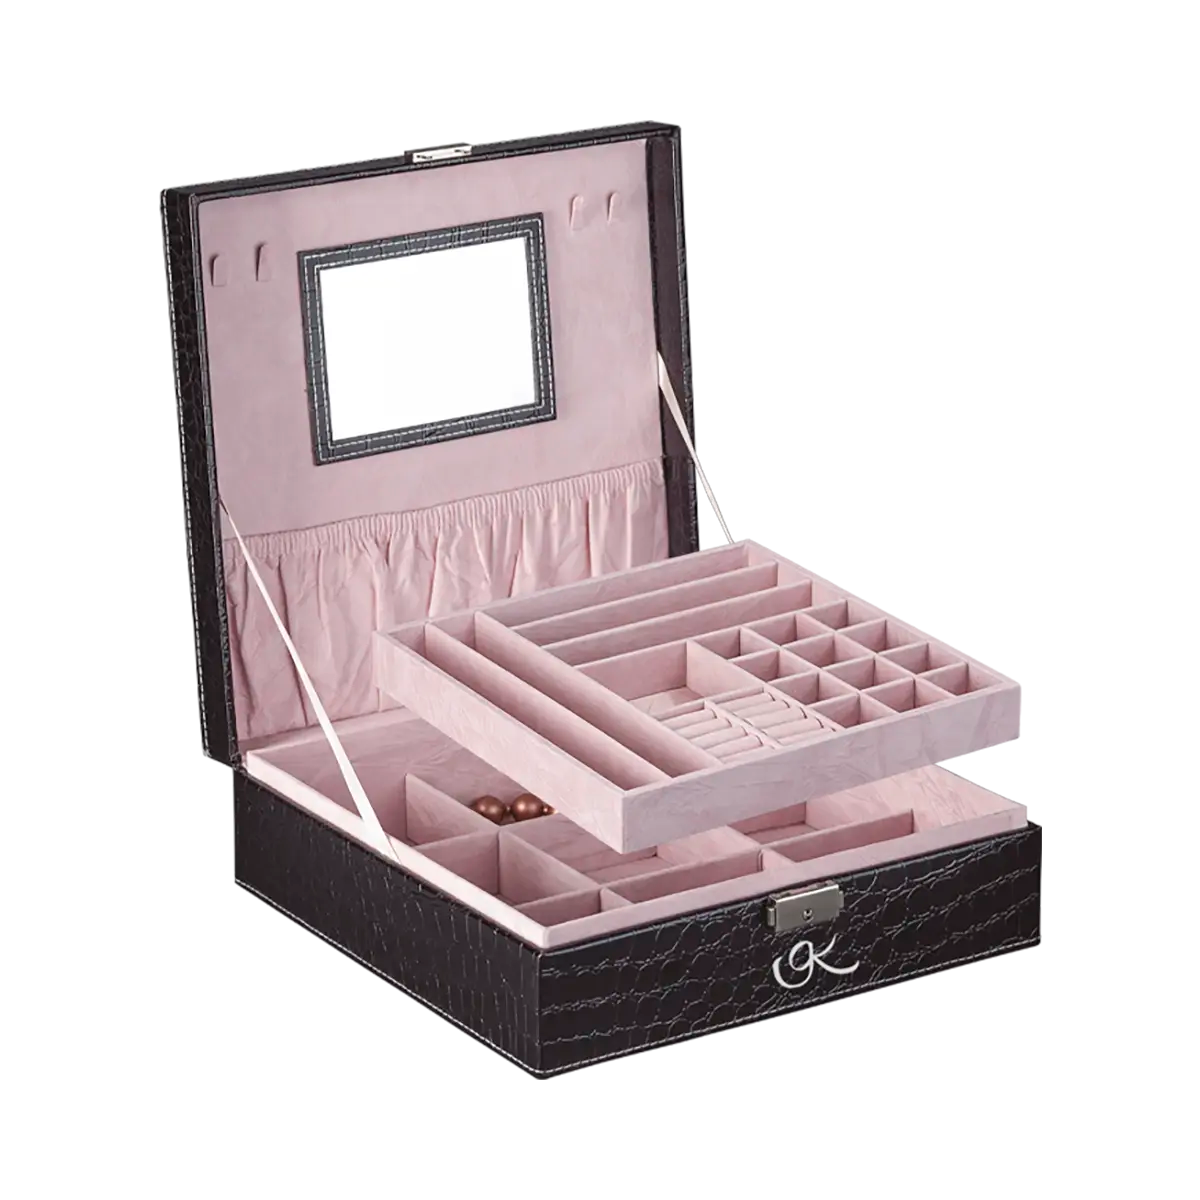 Large black vinyl snakeskin print with pink interior jewelry box for women. Shop in San Diego, CA.